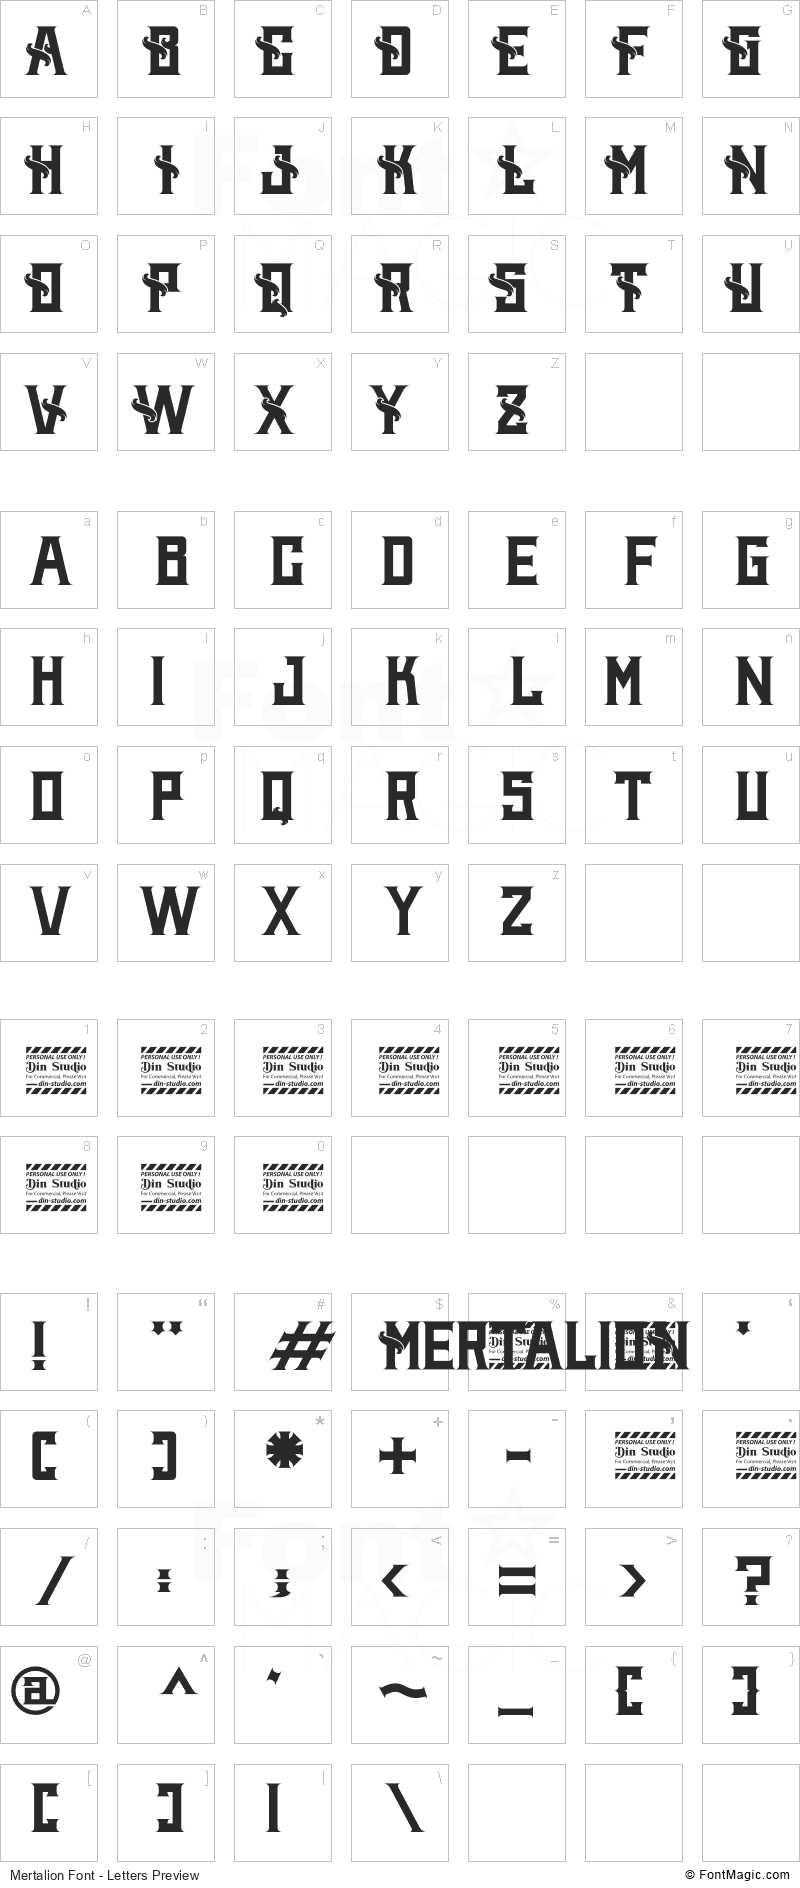 Mertalion Font - All Latters Preview Chart